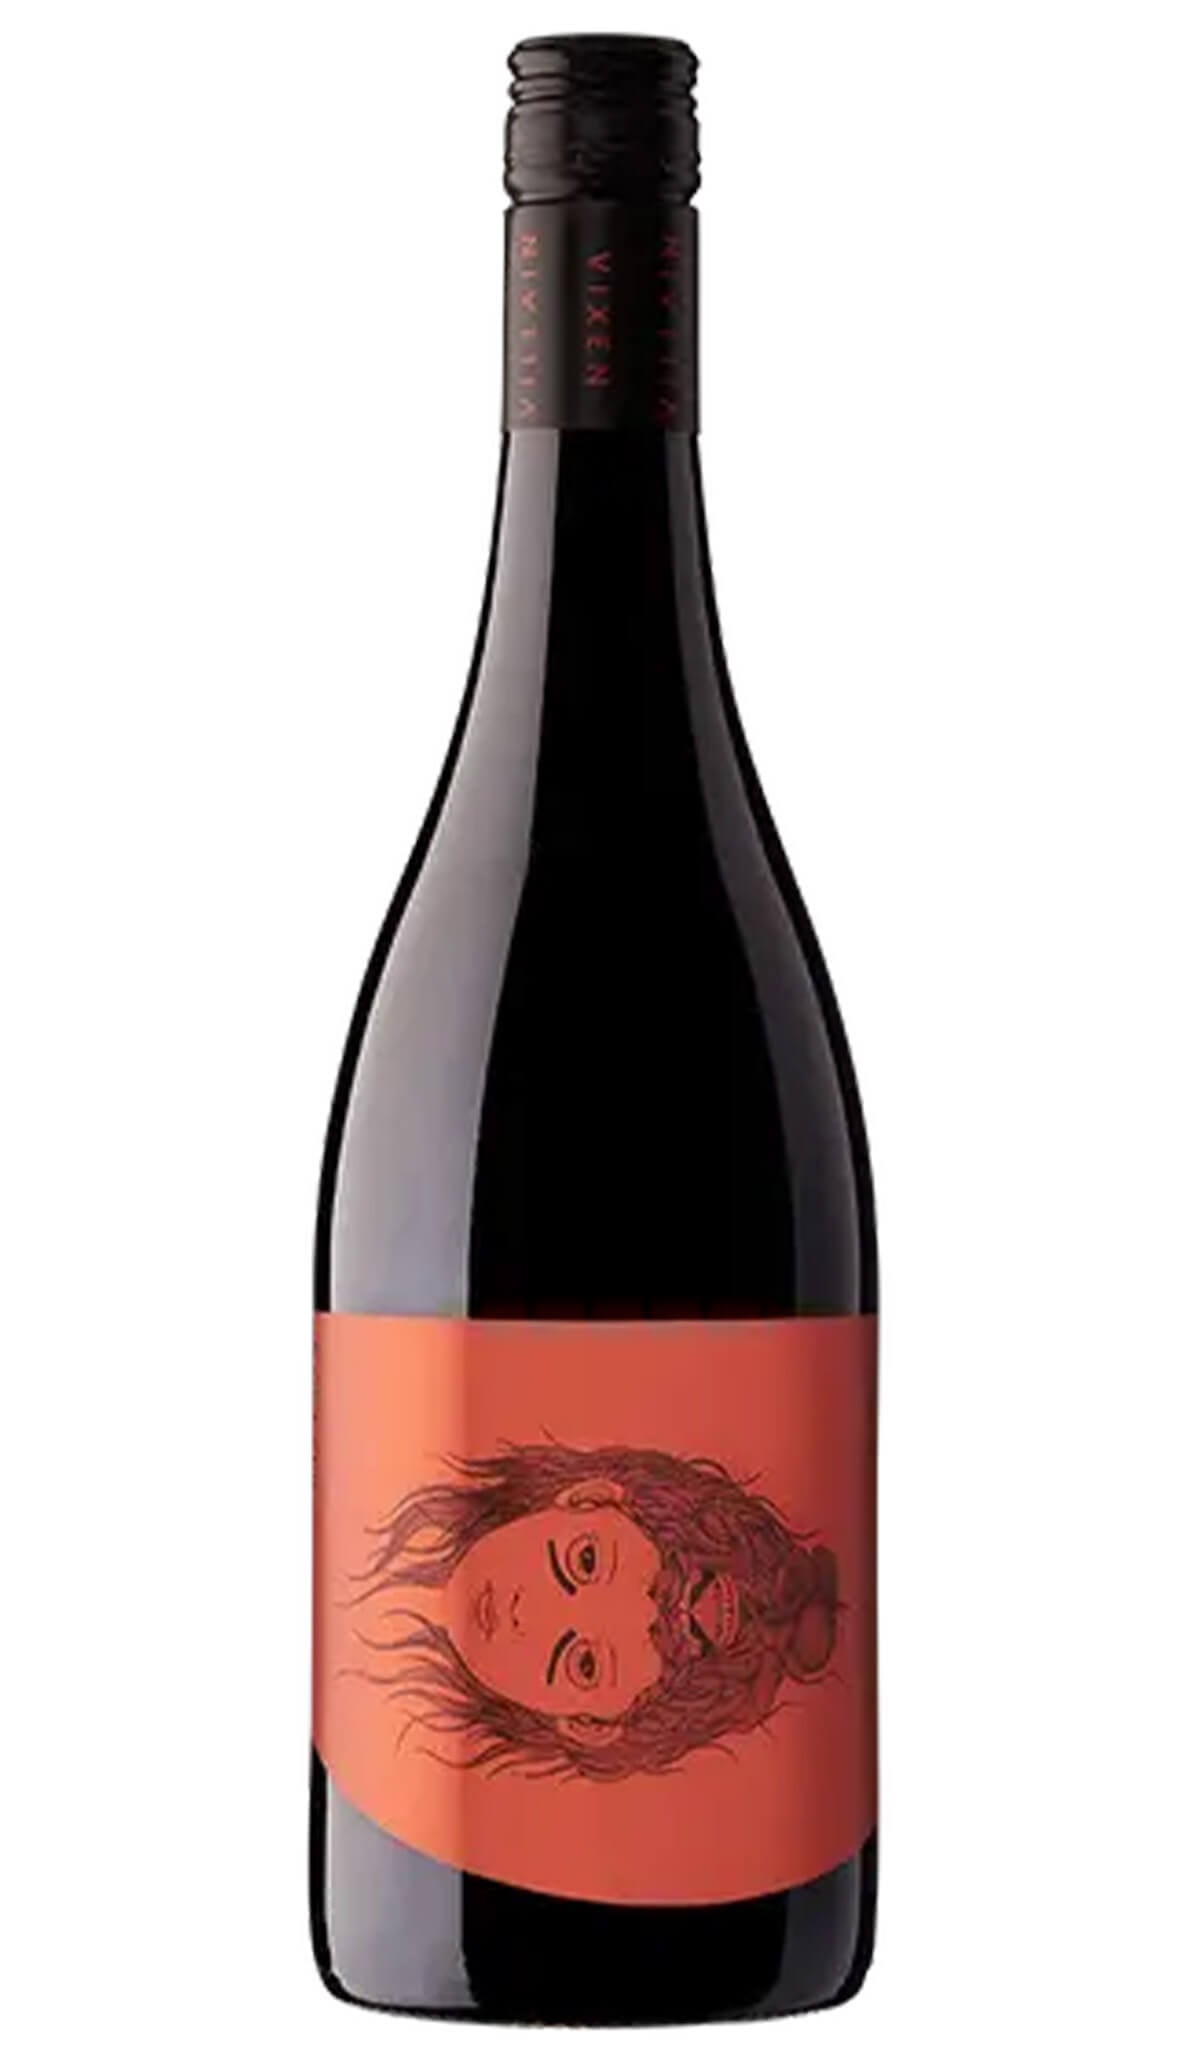 Find out more, explore the range and purchase Hentley Farm Villain & Vixen GSM 2021 (Barossa) available online at Wine Sellers Direct - Australia's independent liquor specialists.